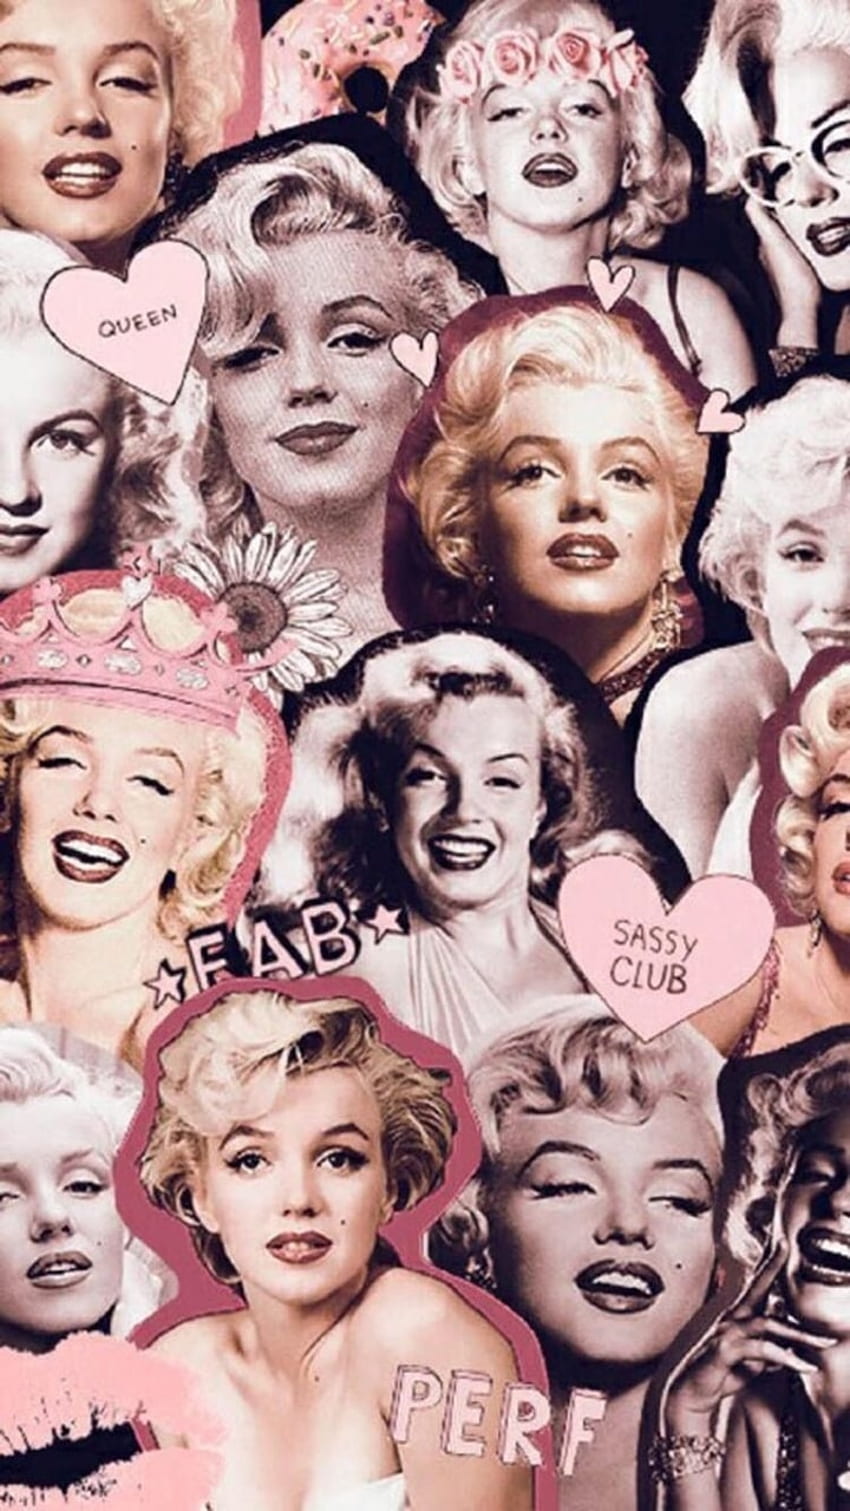 MARILYN COLLAGEX discovered by Renee', Marilyn Monroe Collage HD phone ...